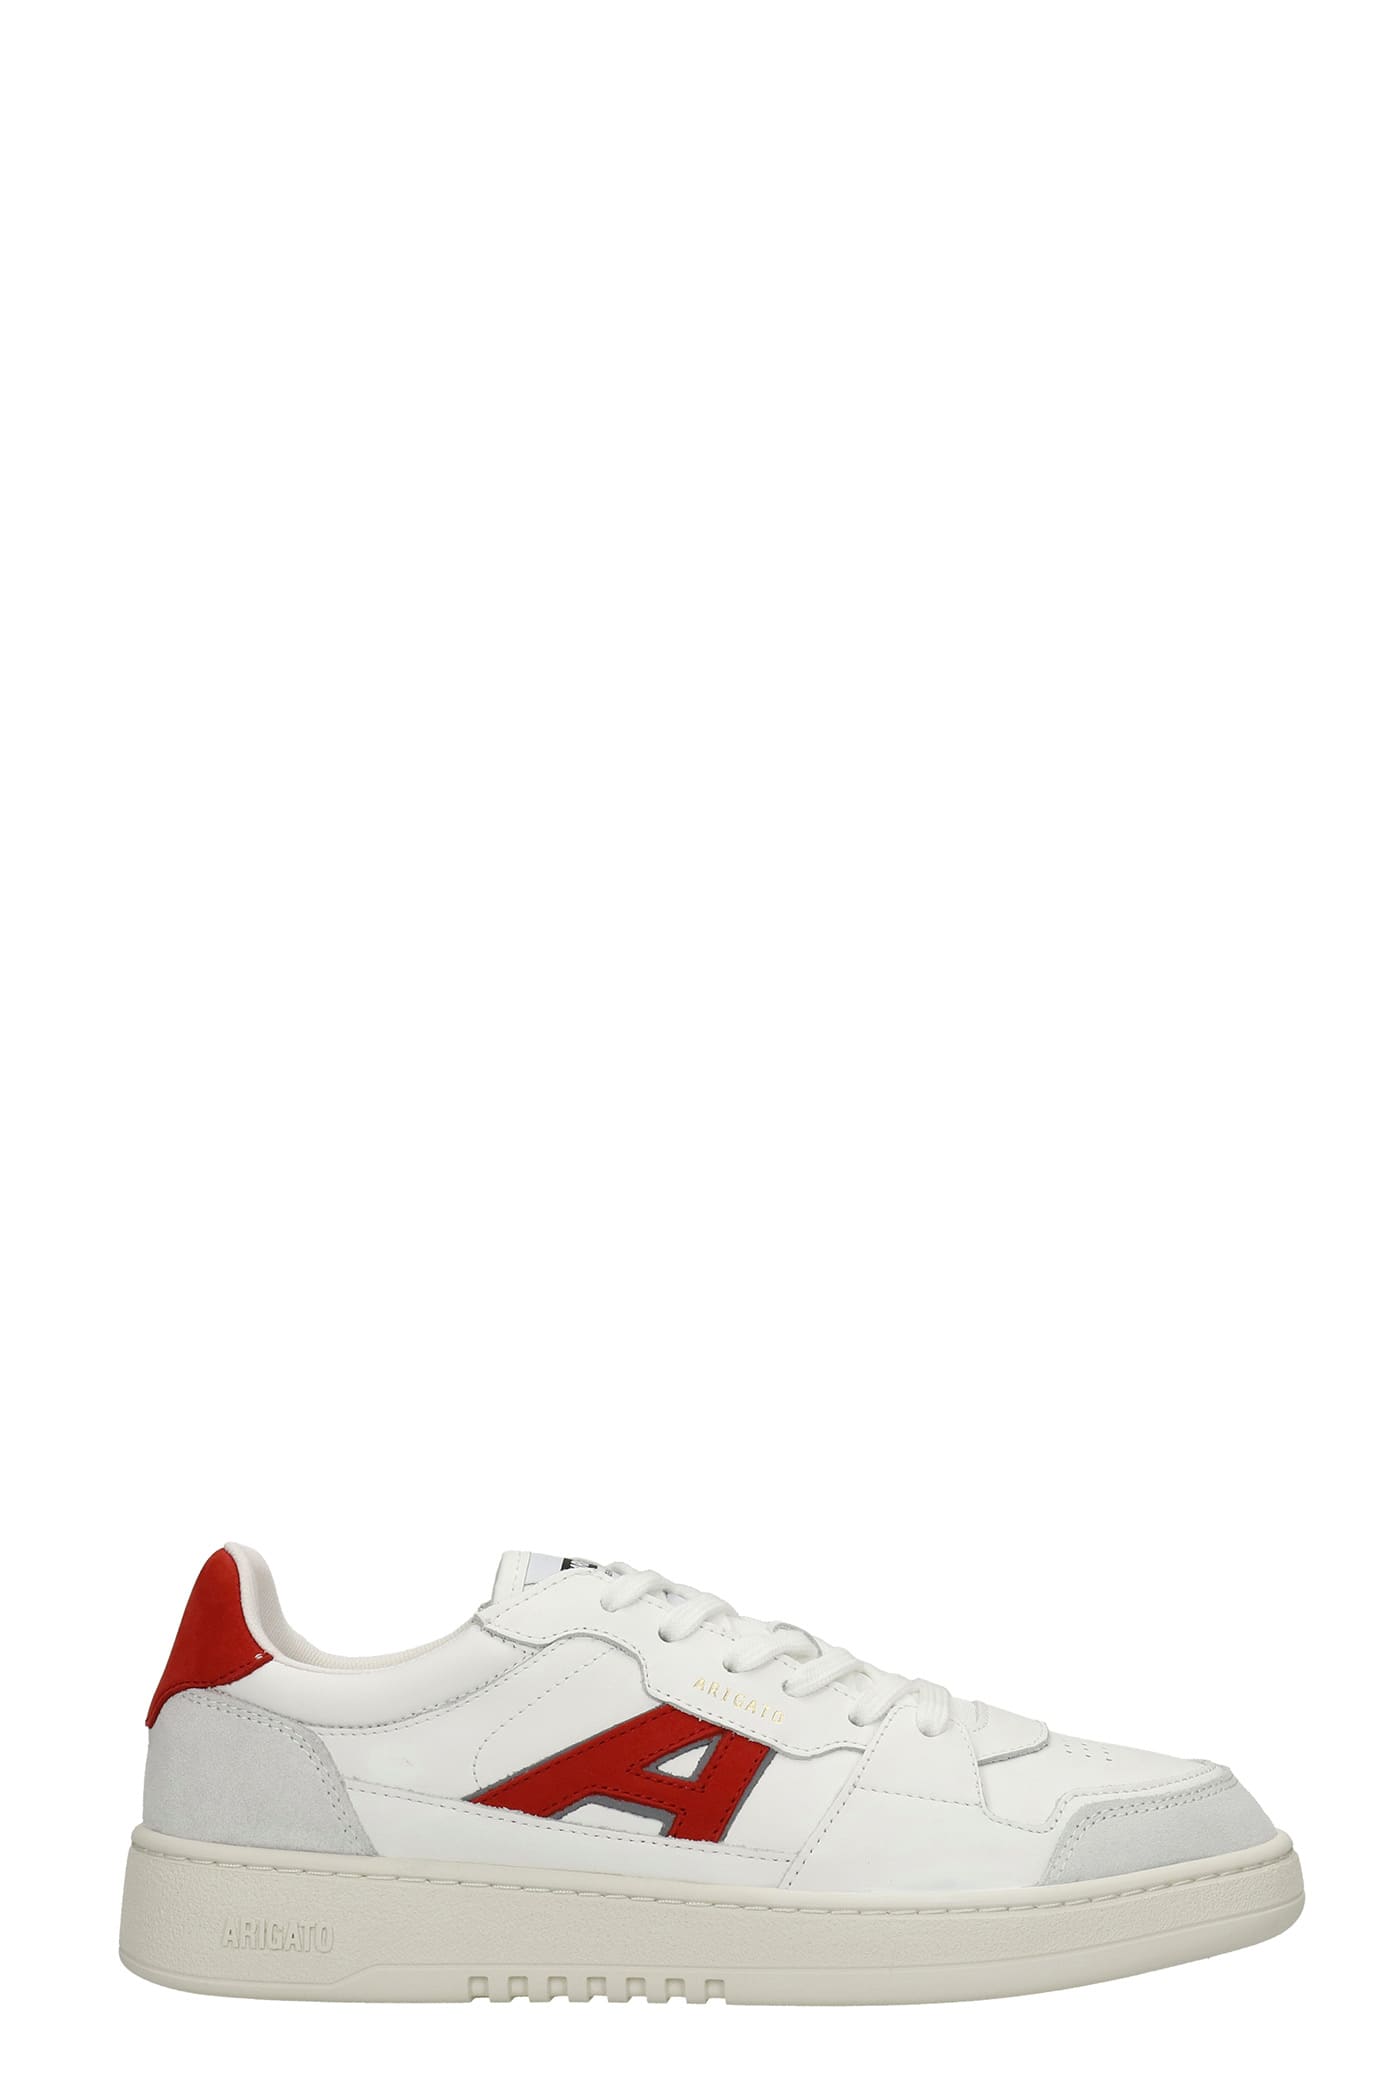 Axel Arigato A-dice Lo Sneakers In White Suede And Leather